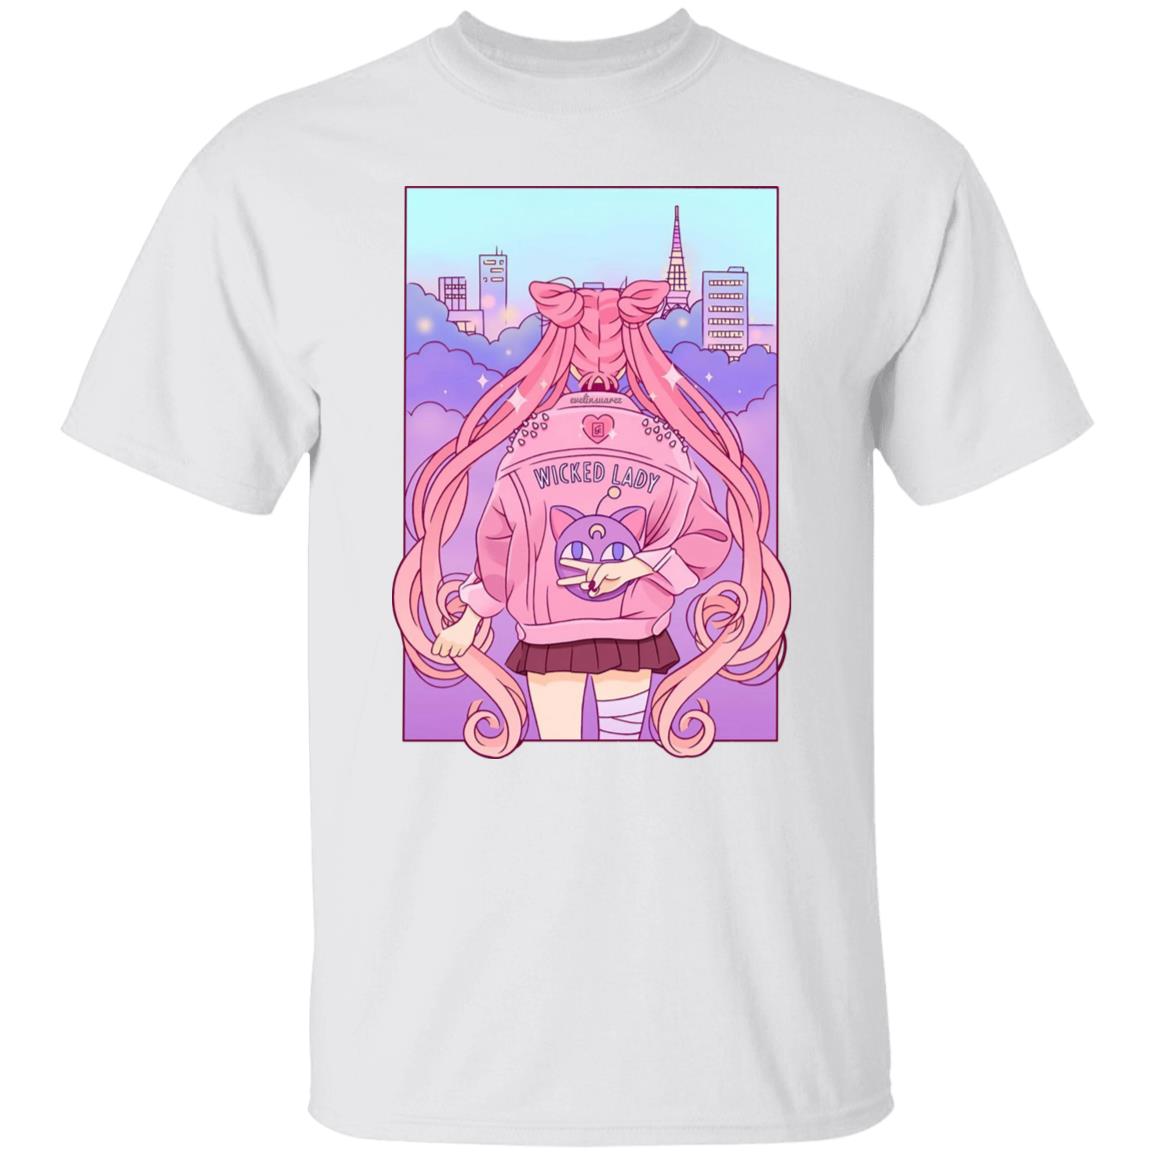 Sailor Moon – Wicked Lady T Shirt